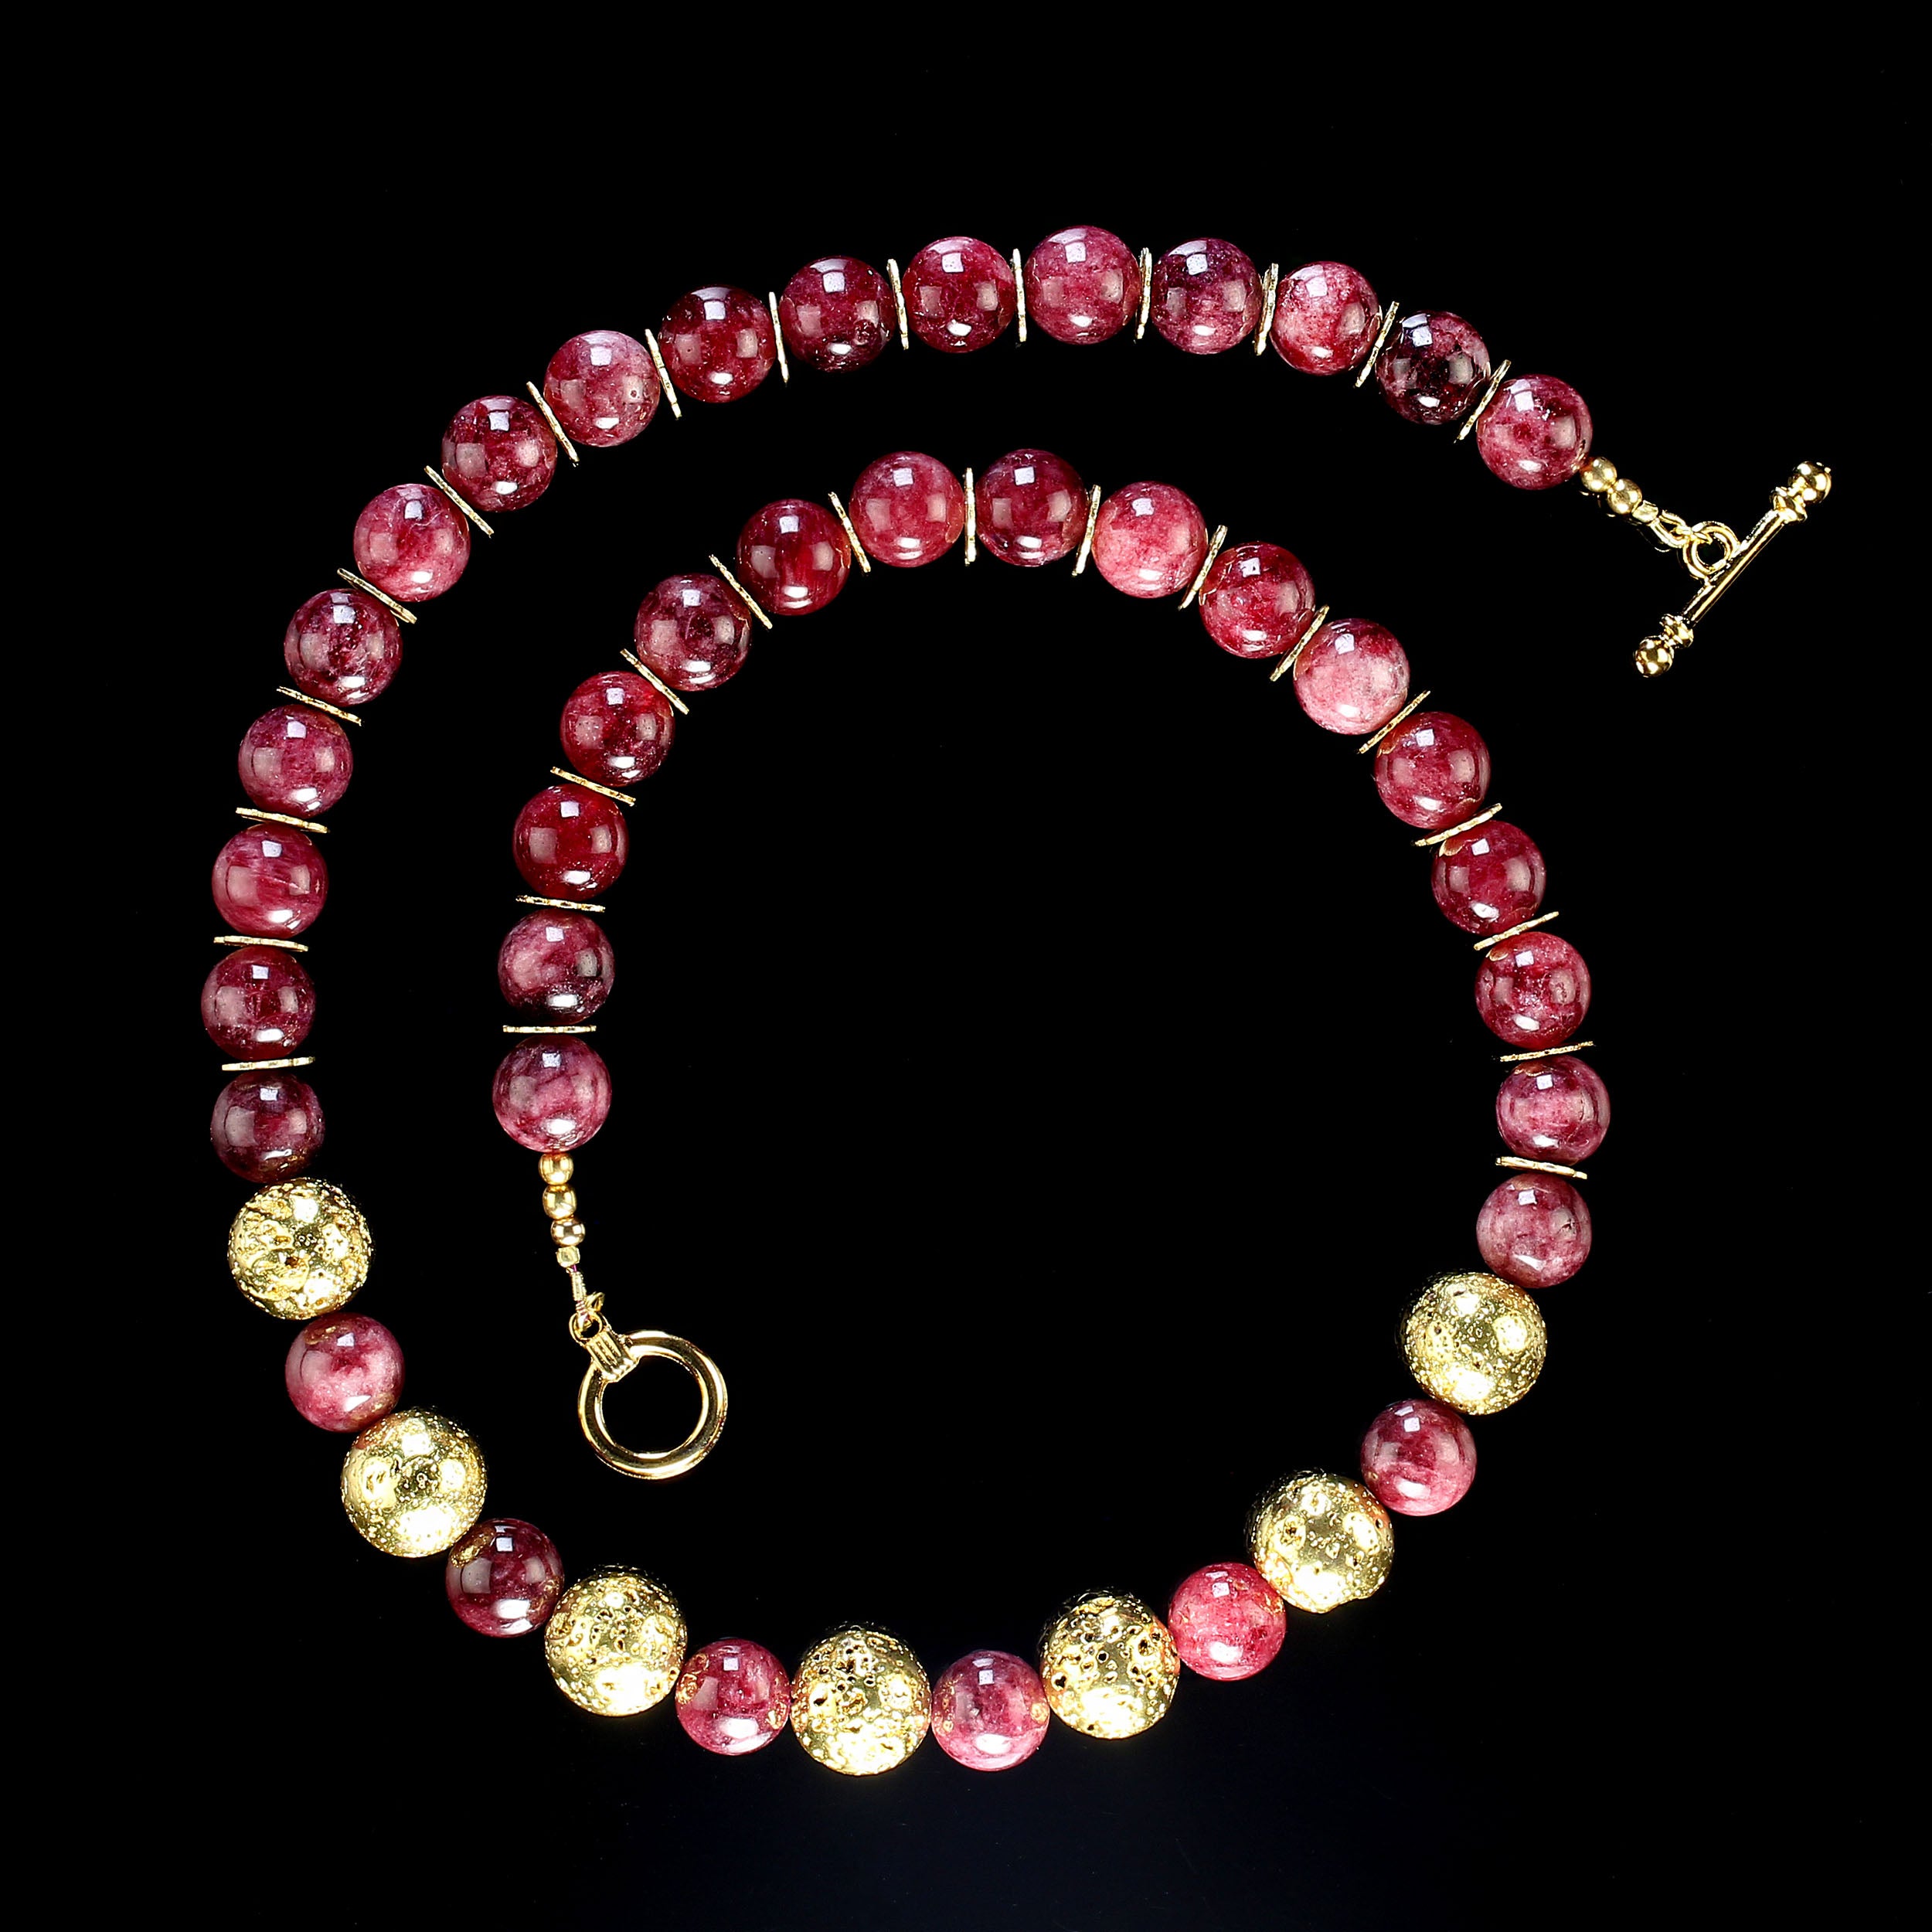 Elegant and unique garnet necklace of smooth highly polished 10 MM round translucent garnets.  These lovely gemstones are accented with gold tone 12 MM lava rocks across the front of the necklace and daisy shaped accents between the remainer of the